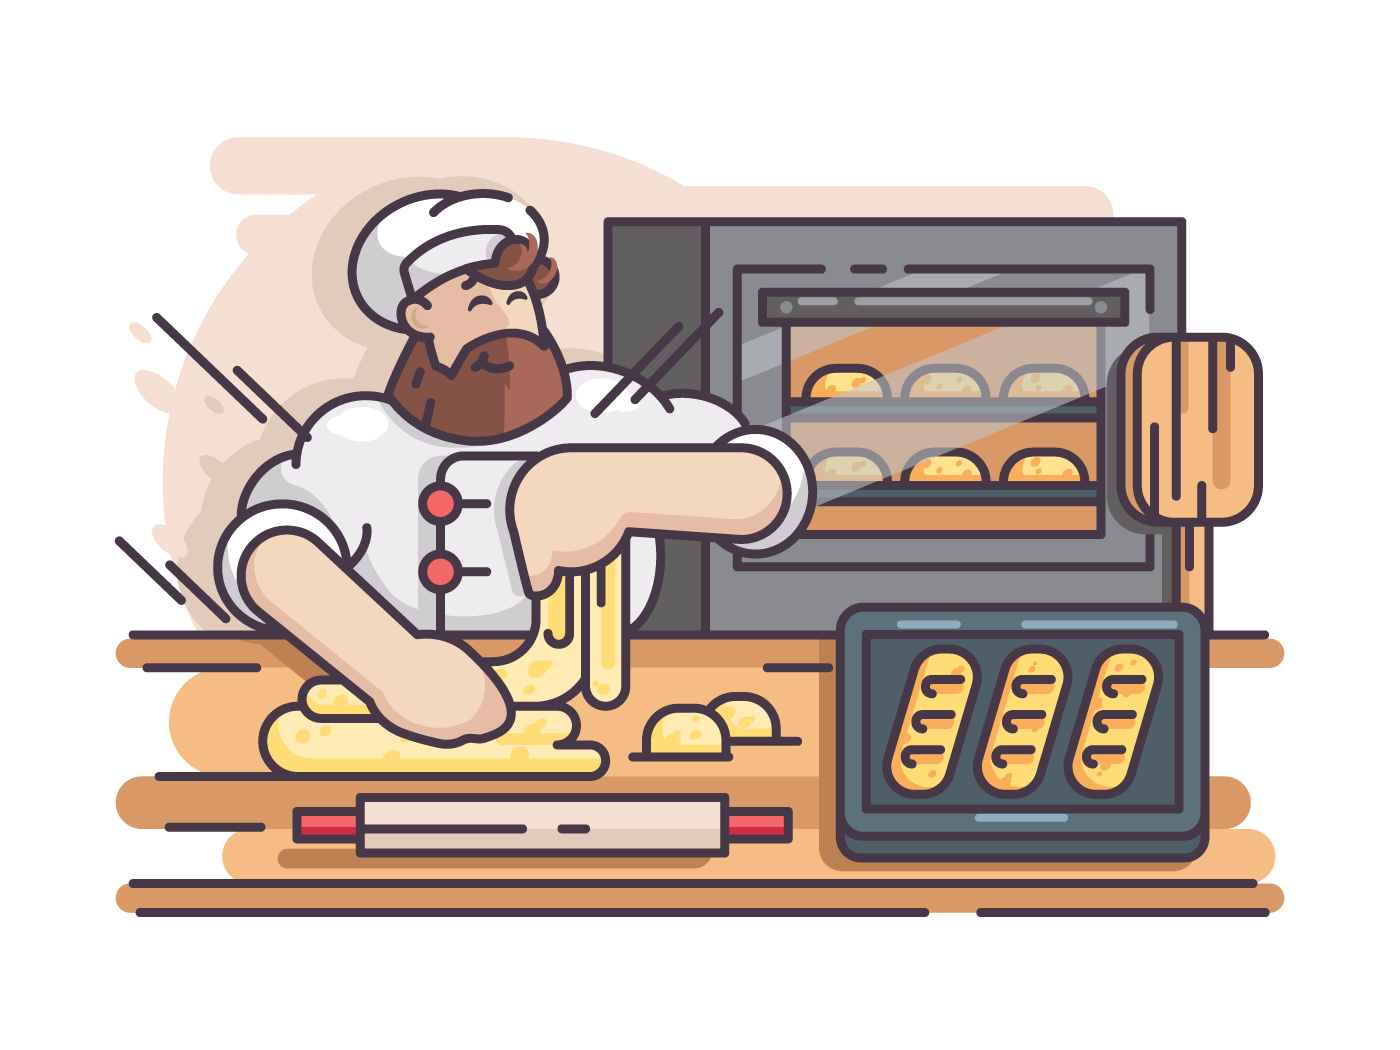 Baker kneads and cooking dough. Cook prepares pastries in kitchen. Vector illustration